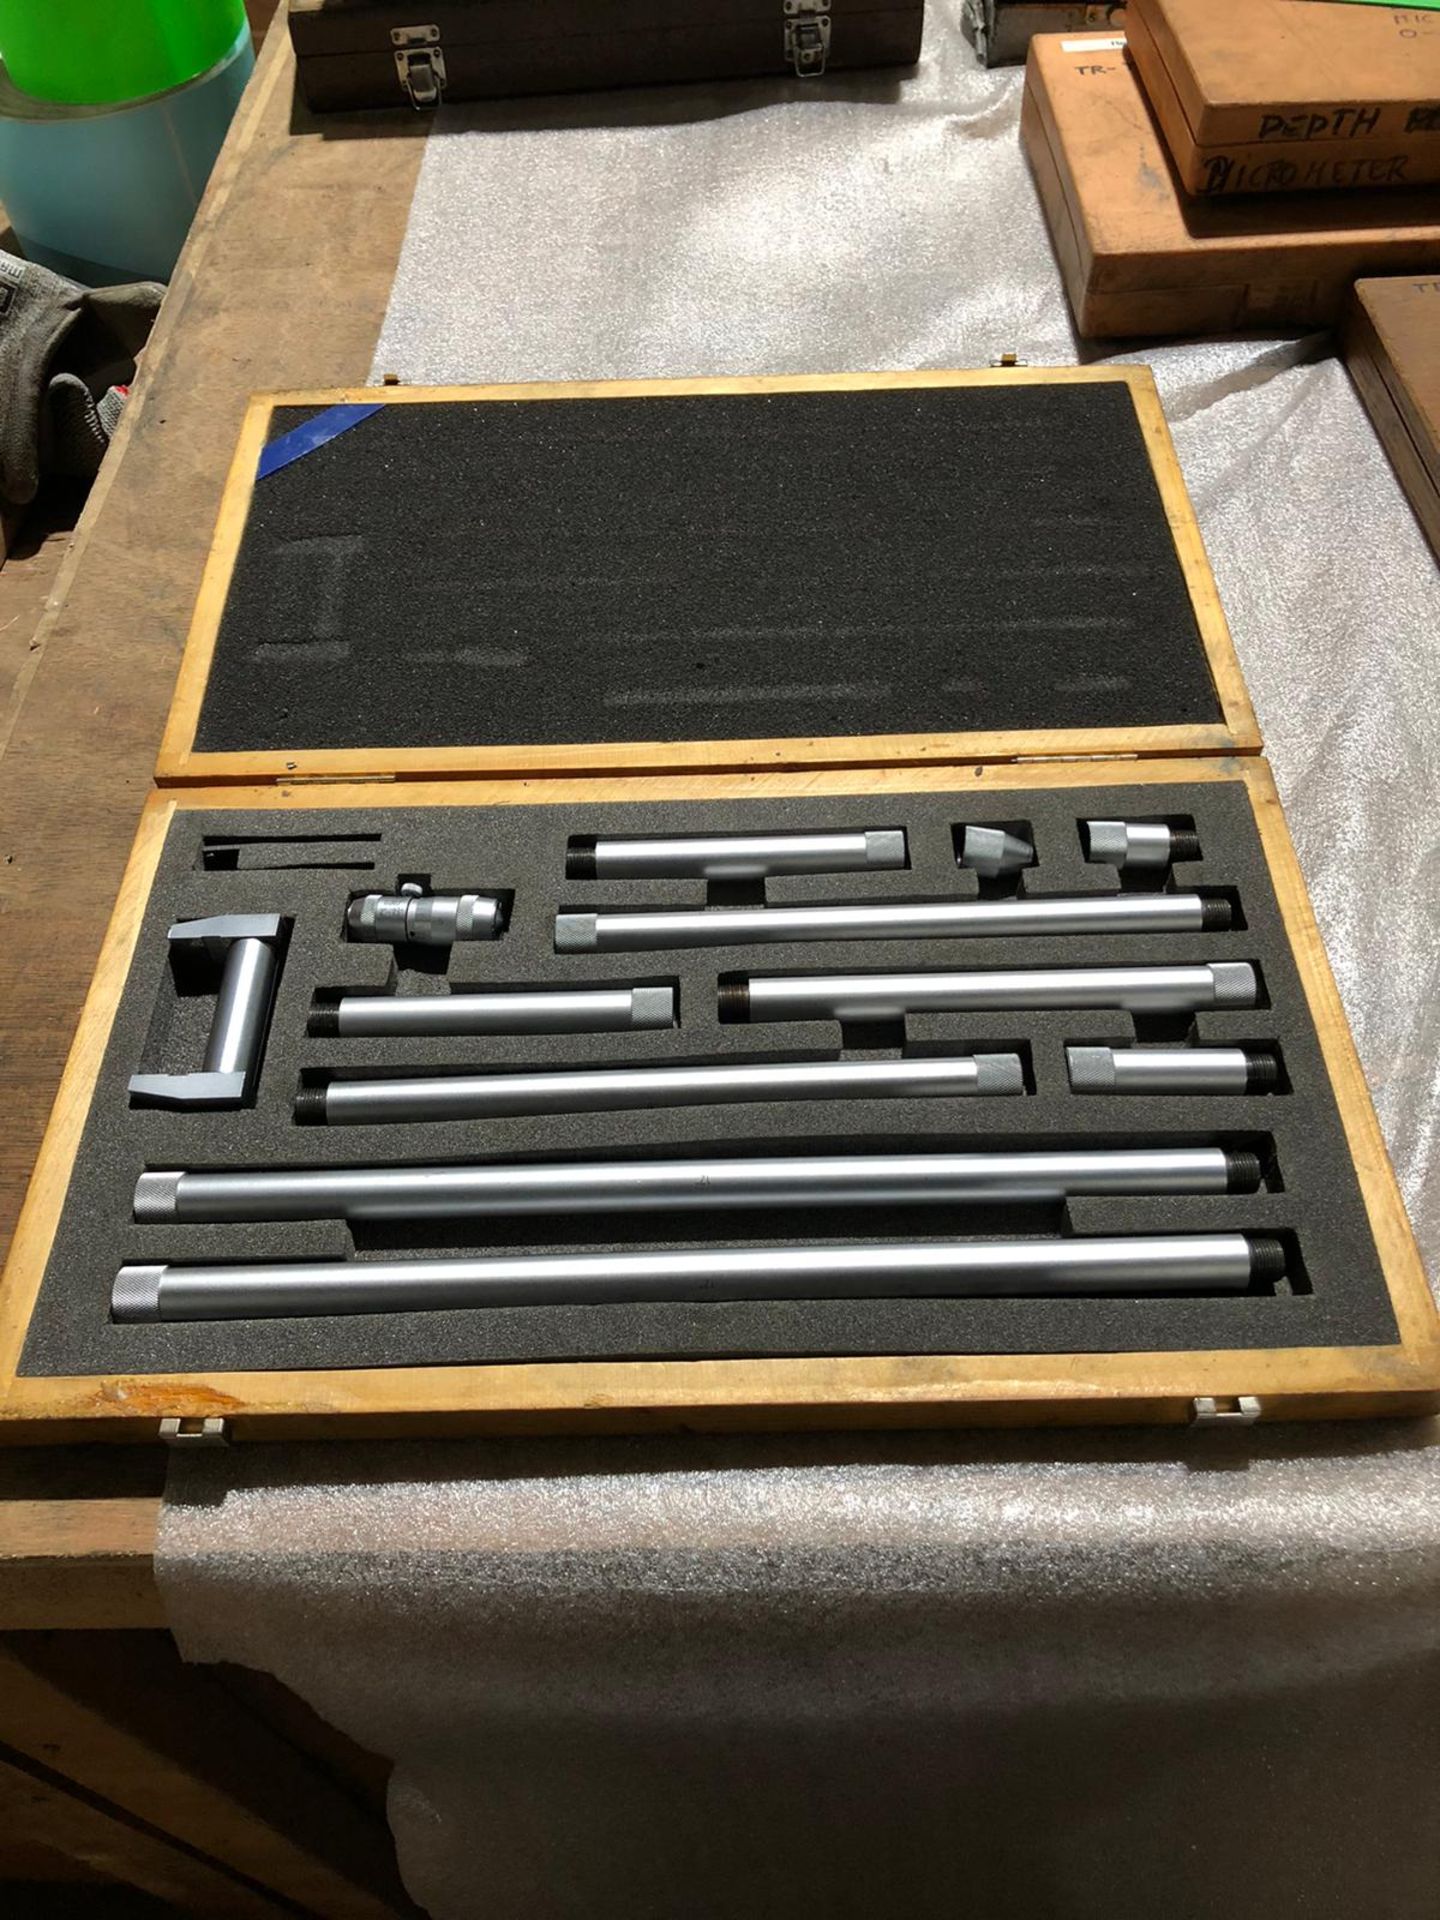 Fowler Inside Micrometer Set with attachments from 2-60" huge range in case